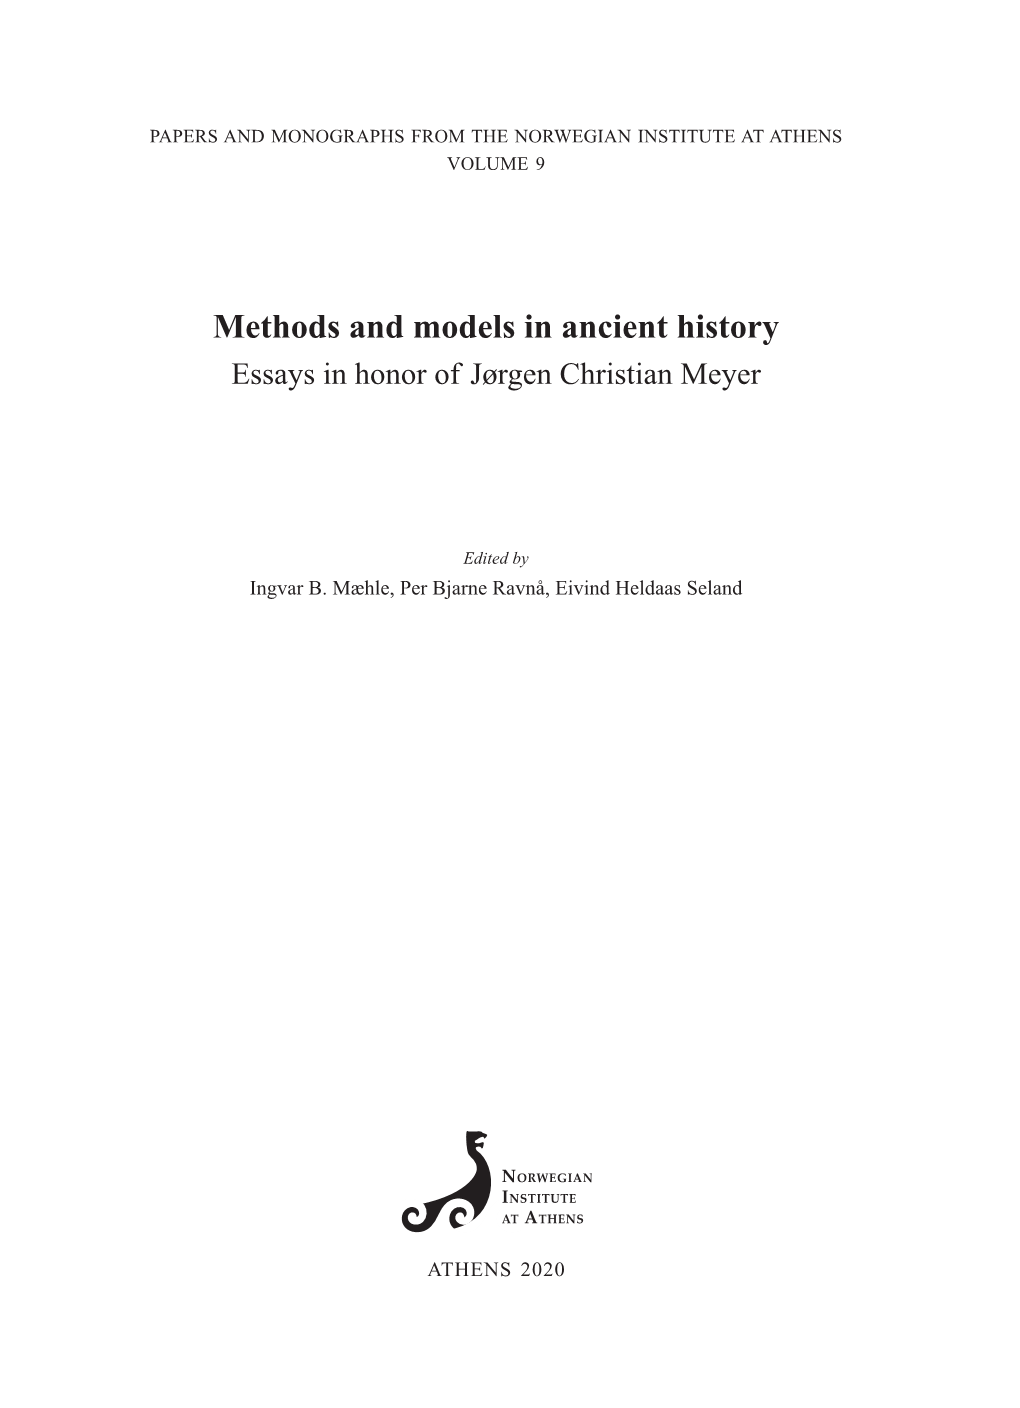 Methods and Models in Ancient History Essays in Honor of Jørgen Christian Meyer